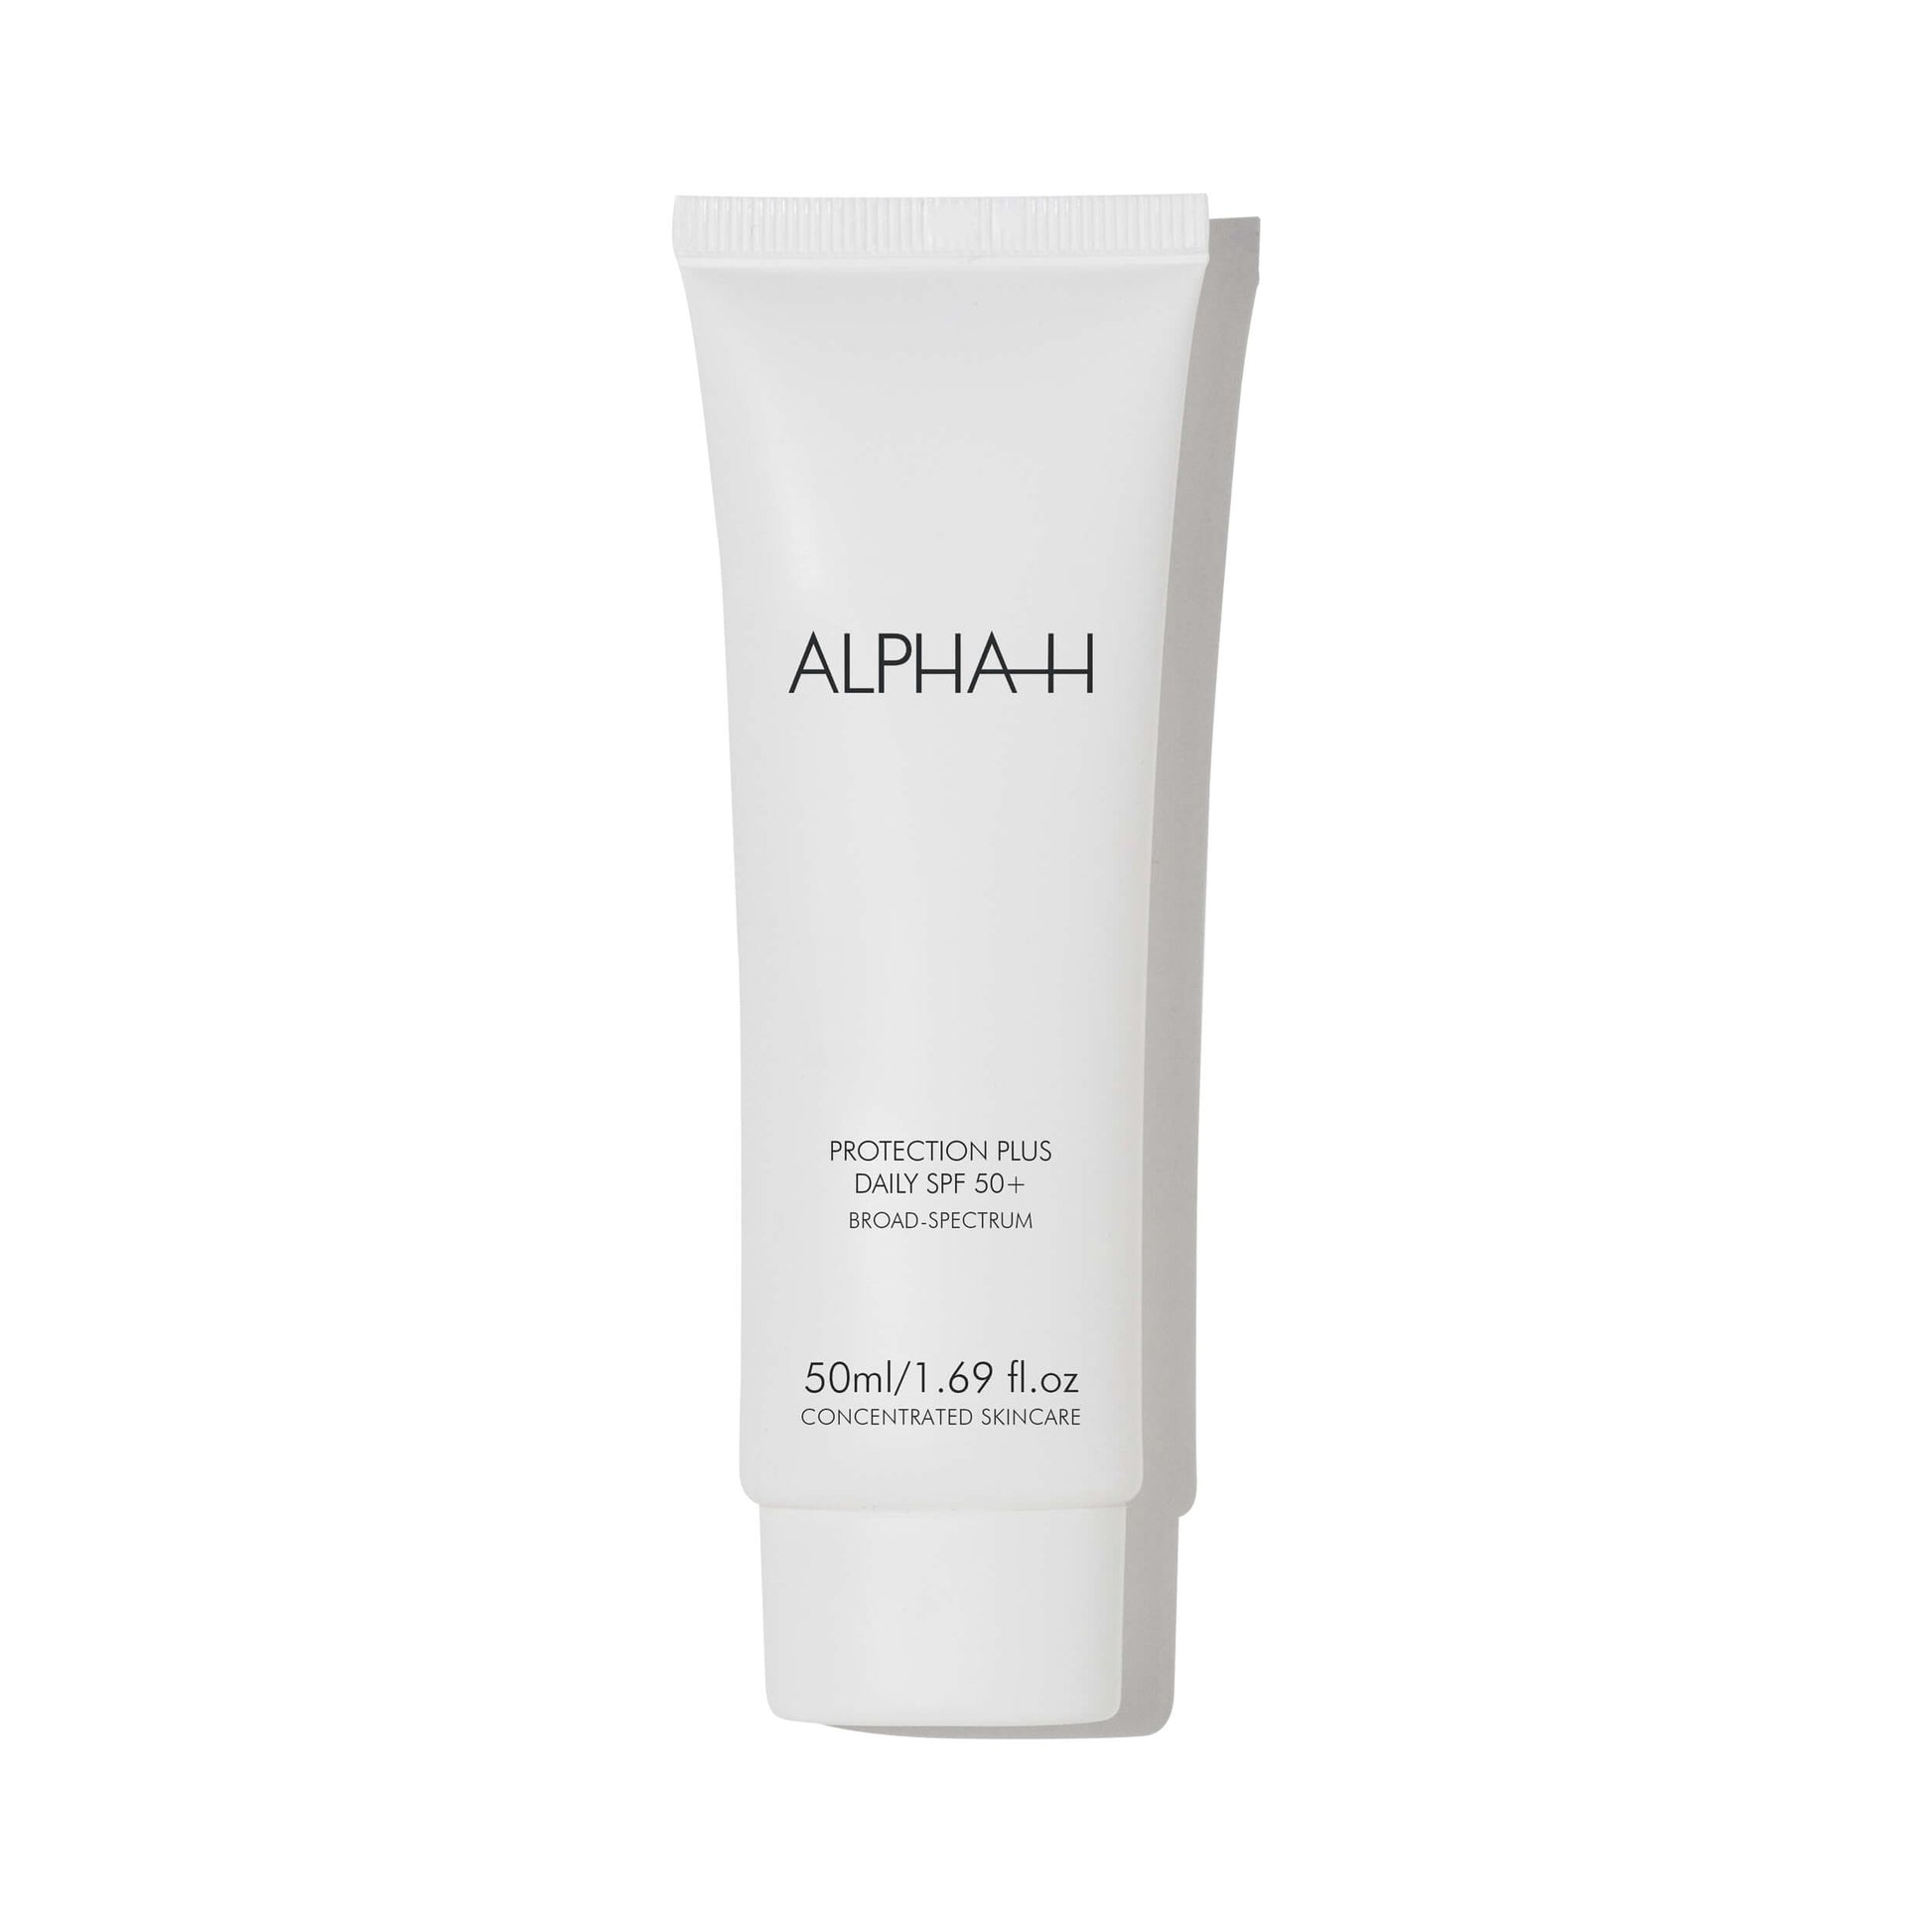 Alpha-H Protection Plus Daily SPF50+